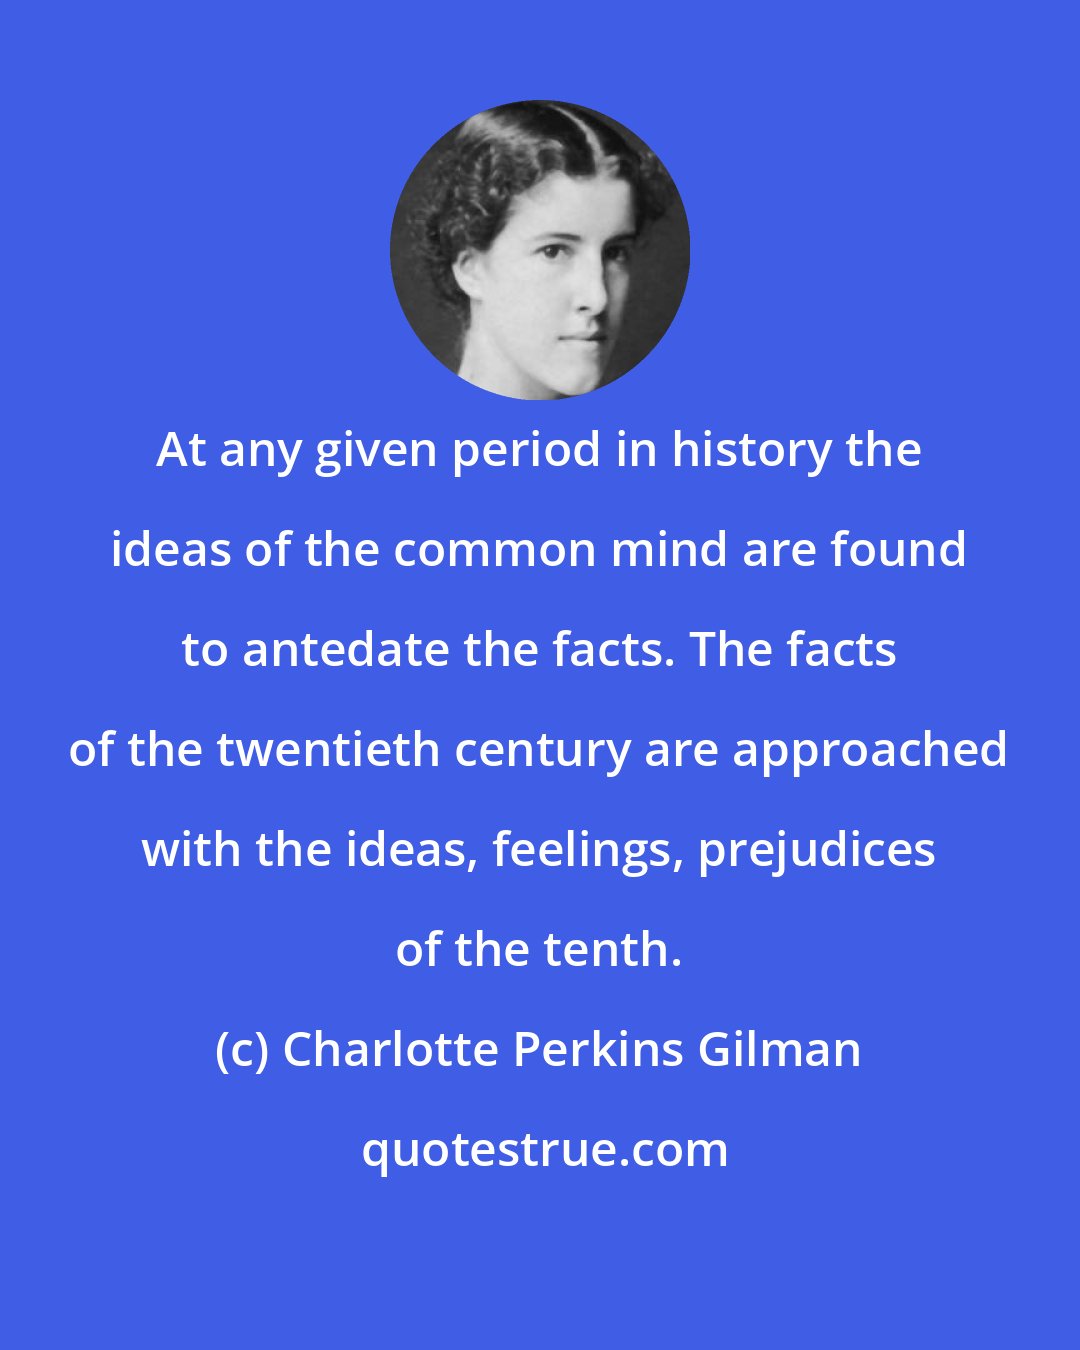 Charlotte Perkins Gilman: At any given period in history the ideas of the common mind are found to antedate the facts. The facts of the twentieth century are approached with the ideas, feelings, prejudices of the tenth.